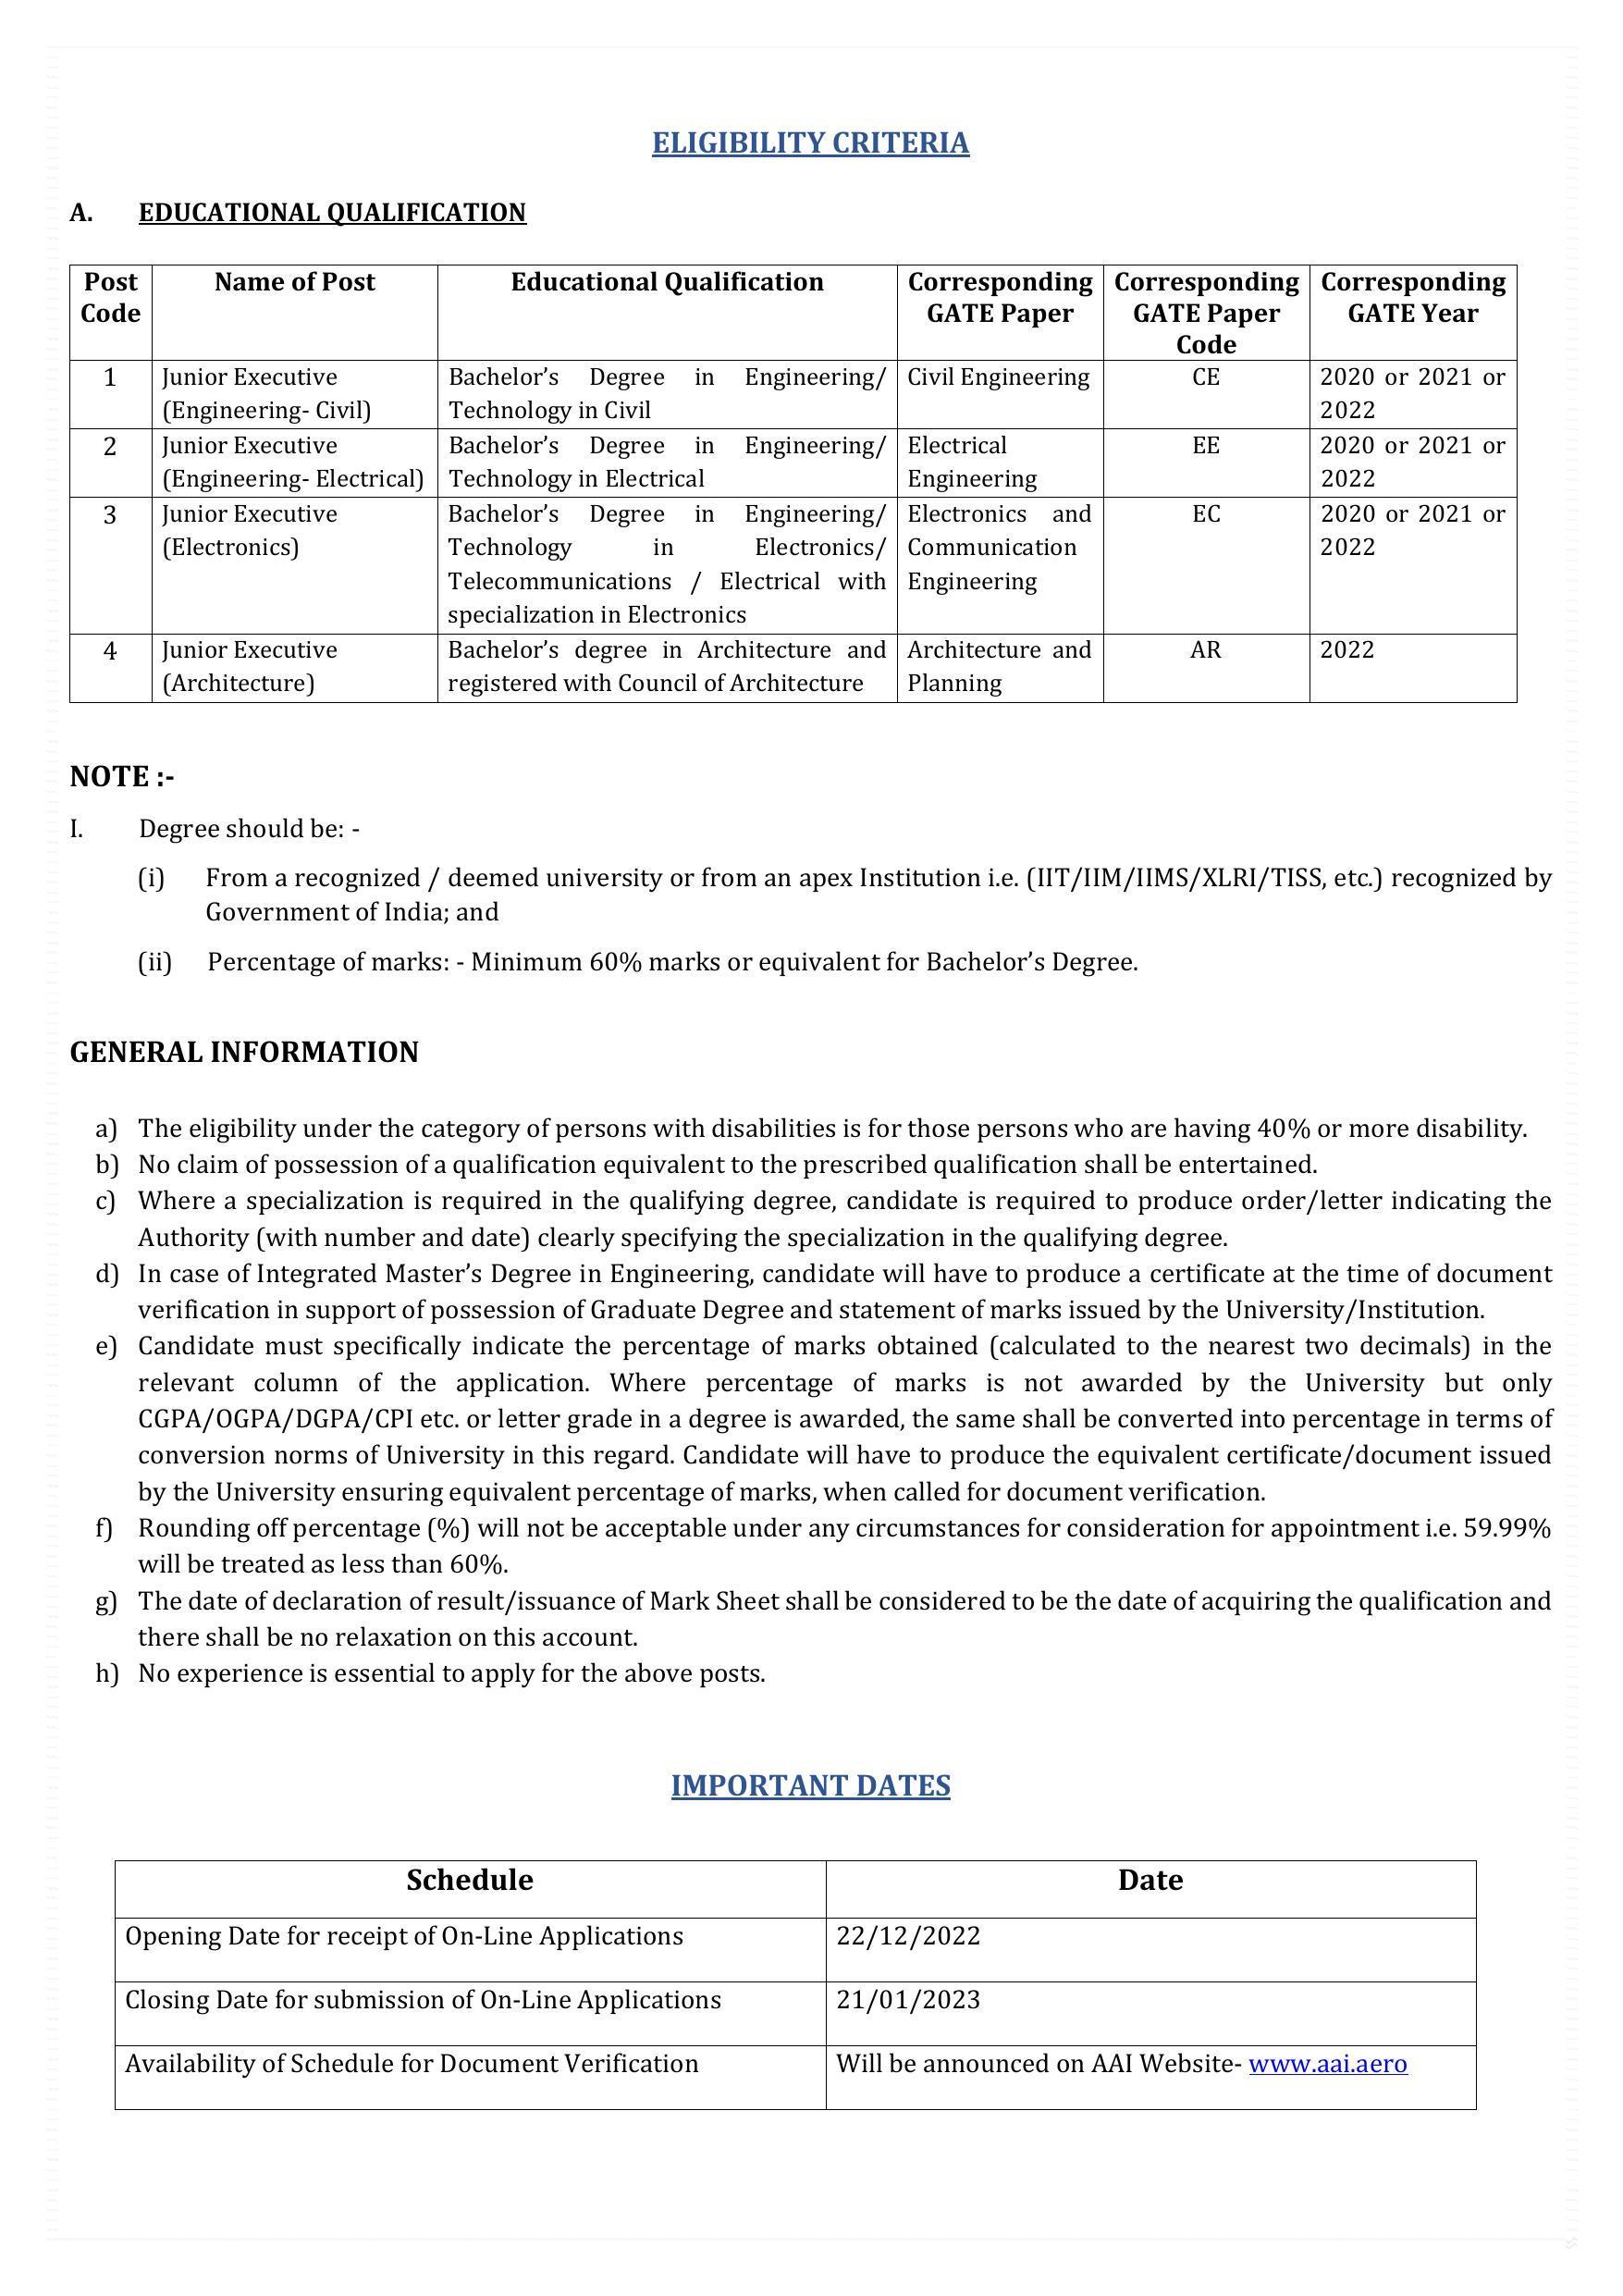 Airports Authority Of India (AAI) Invites Application for 596 Junior Executive Recruitment 2022 - Page 1